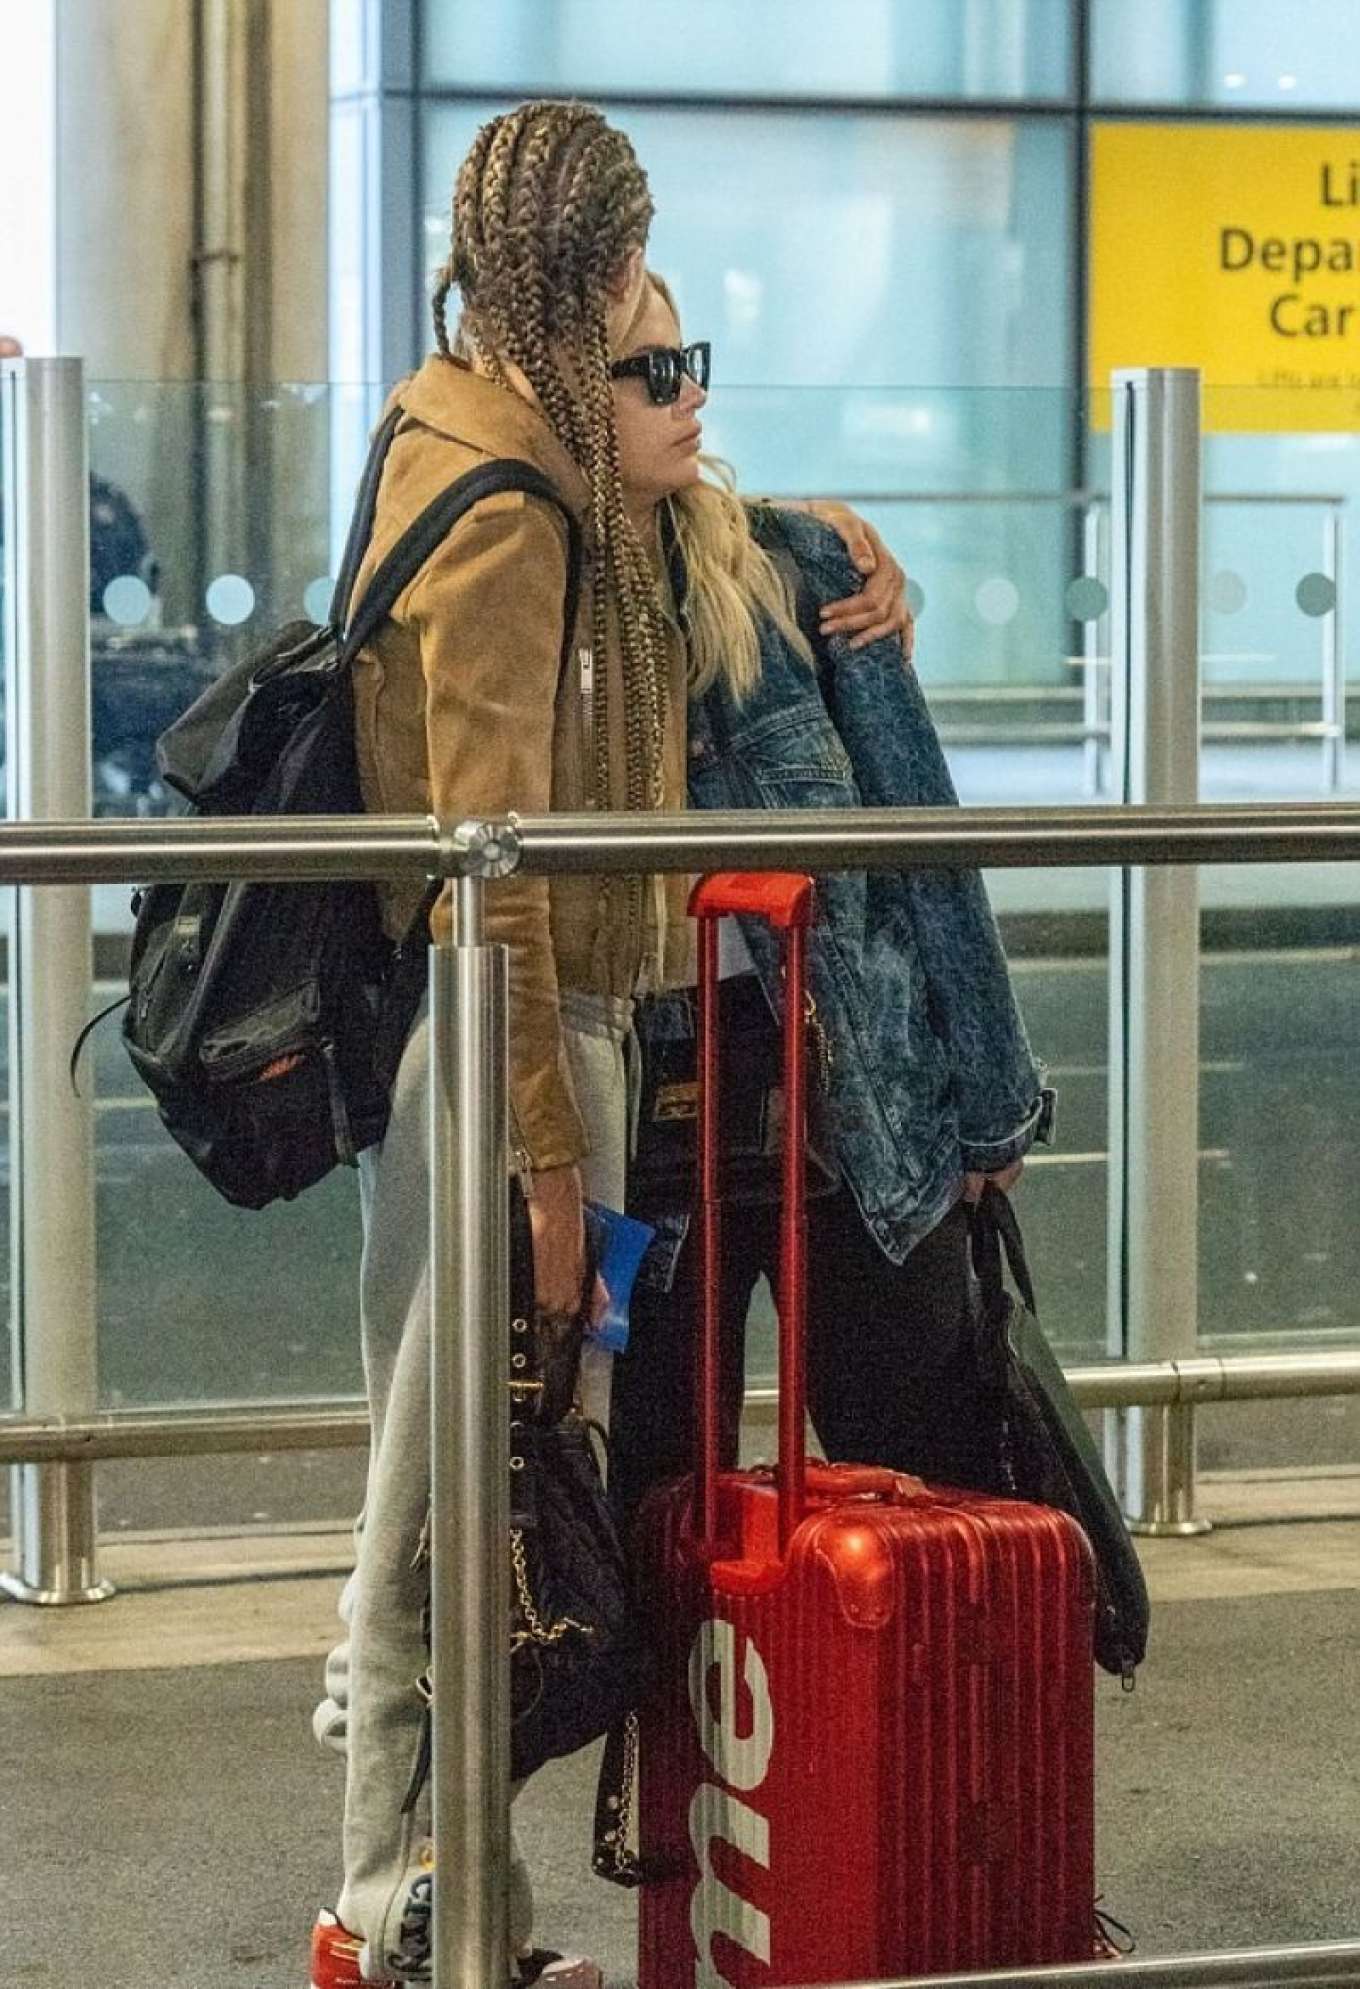 Ashley Benson and Cara Delevingne at Heathrow Airport in London